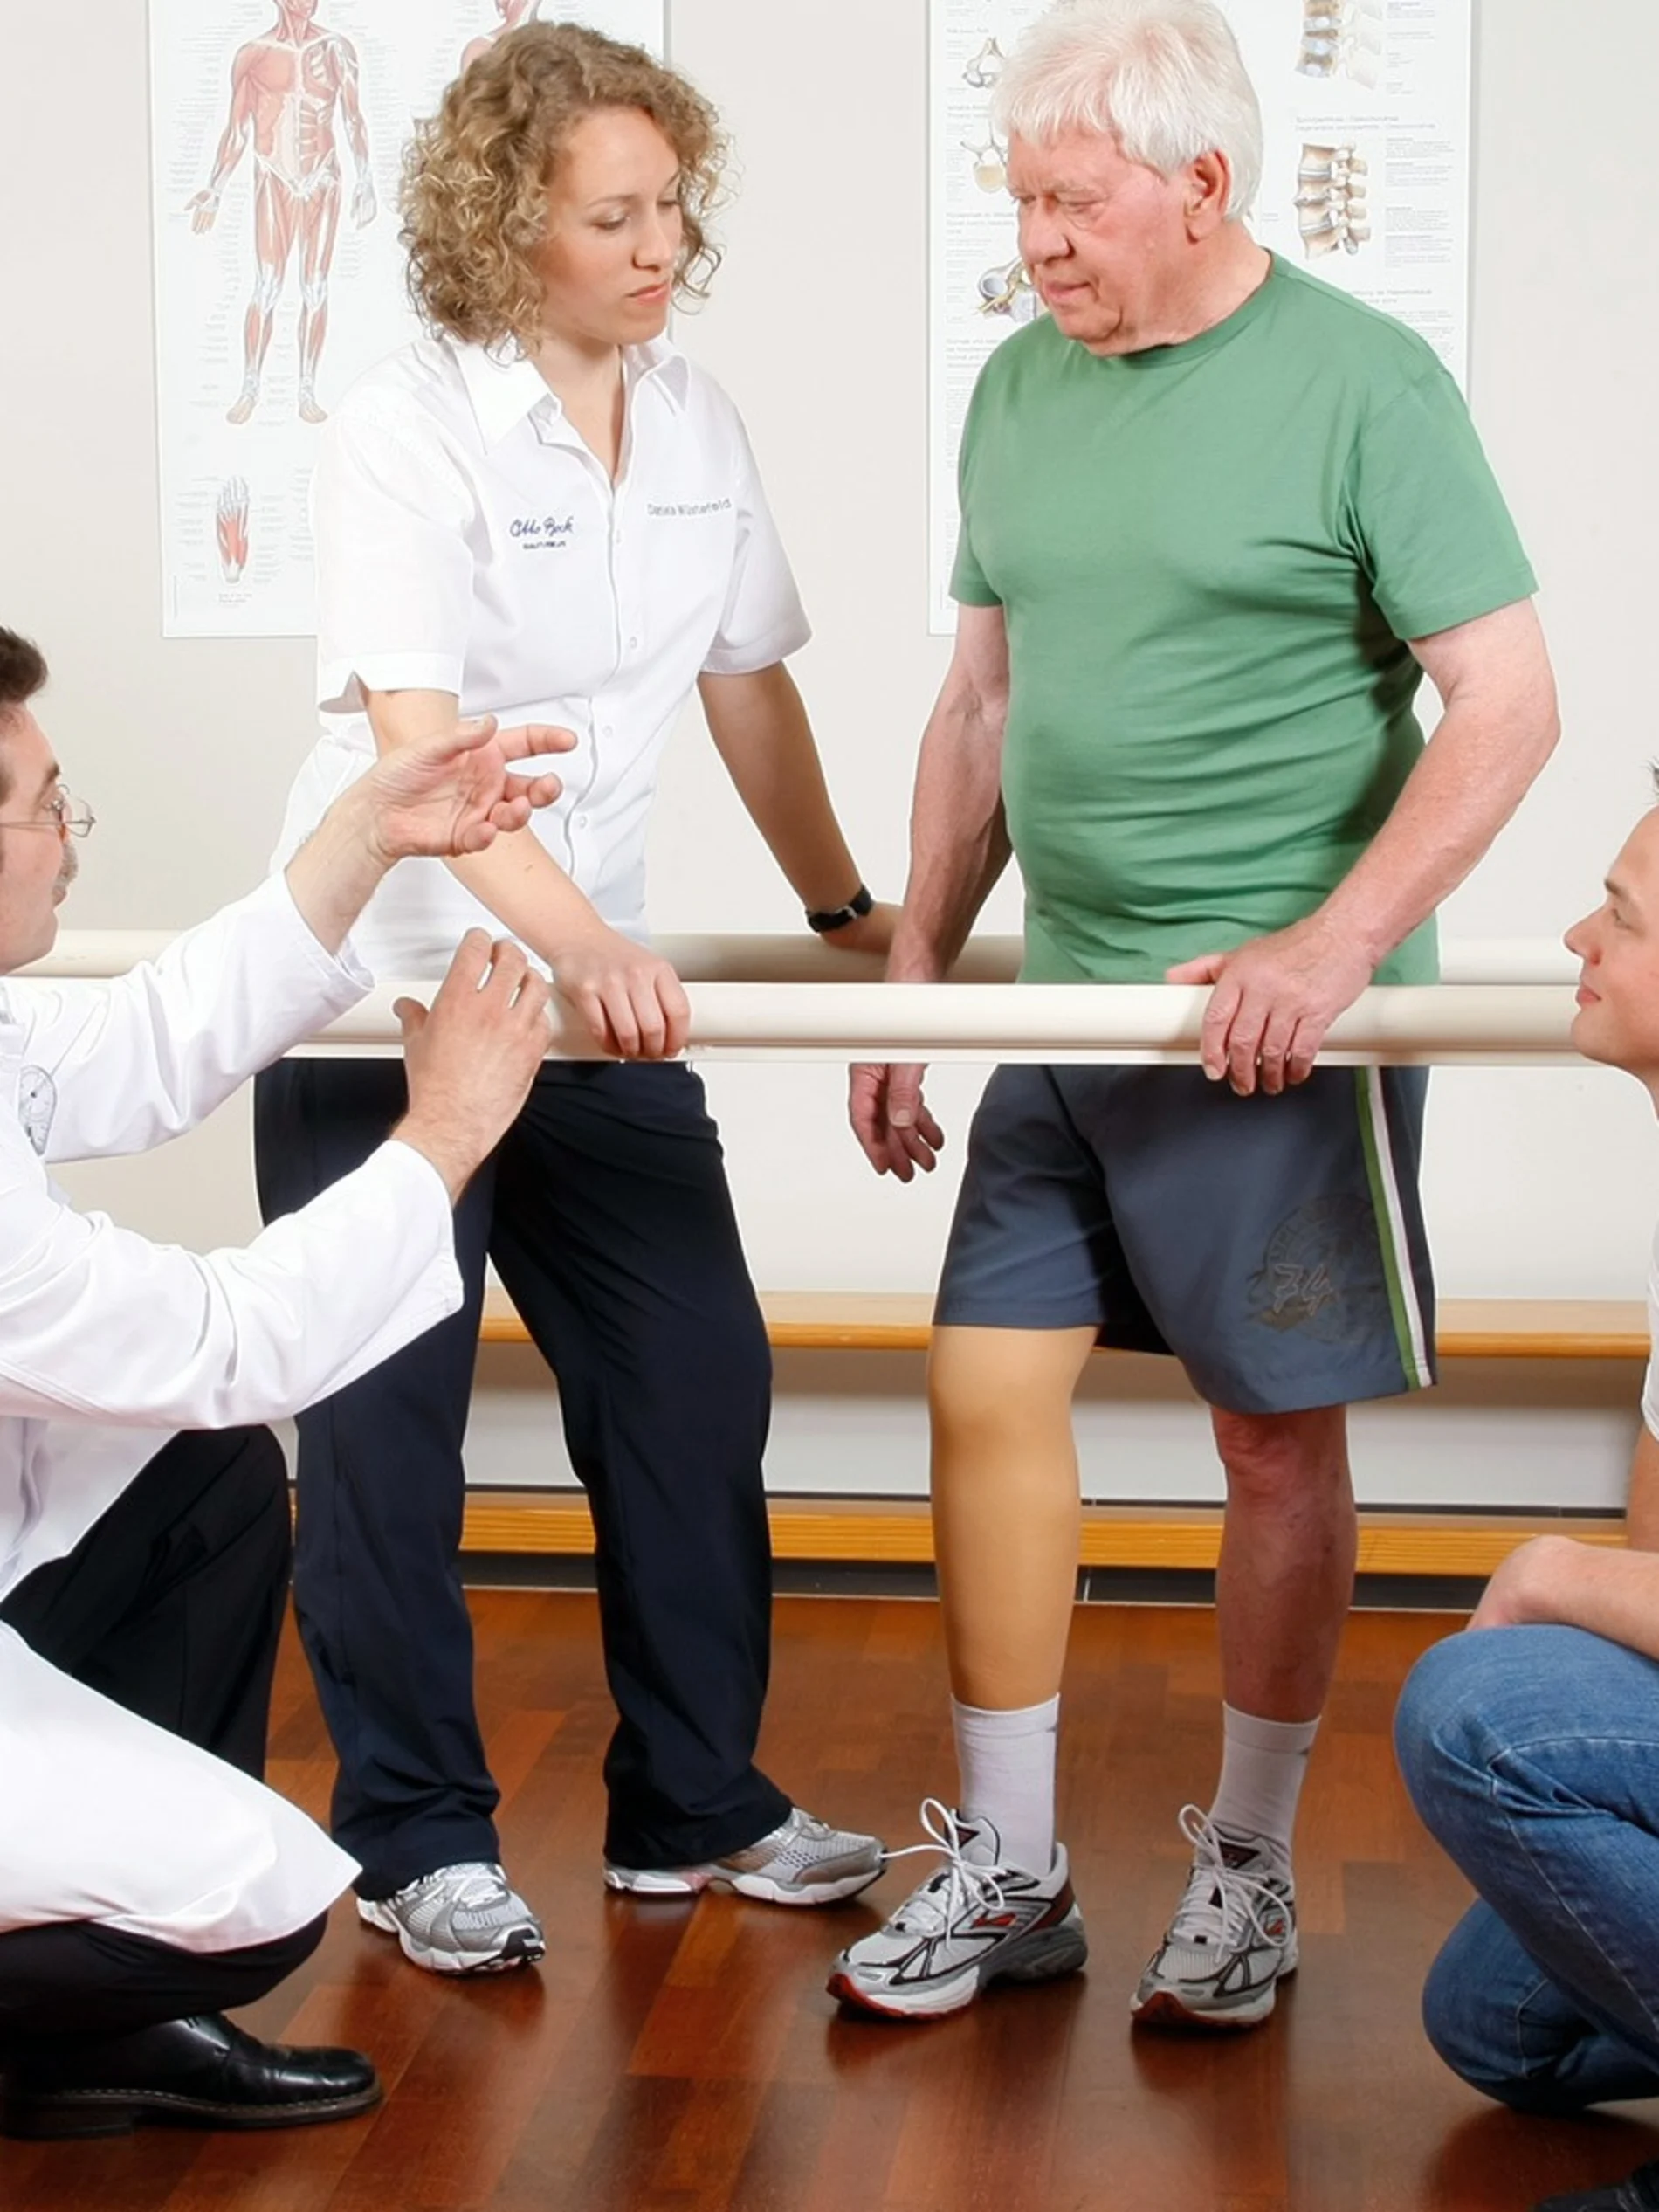 An amputee is accompanied by O&P professionals as he trials a leg prothesis